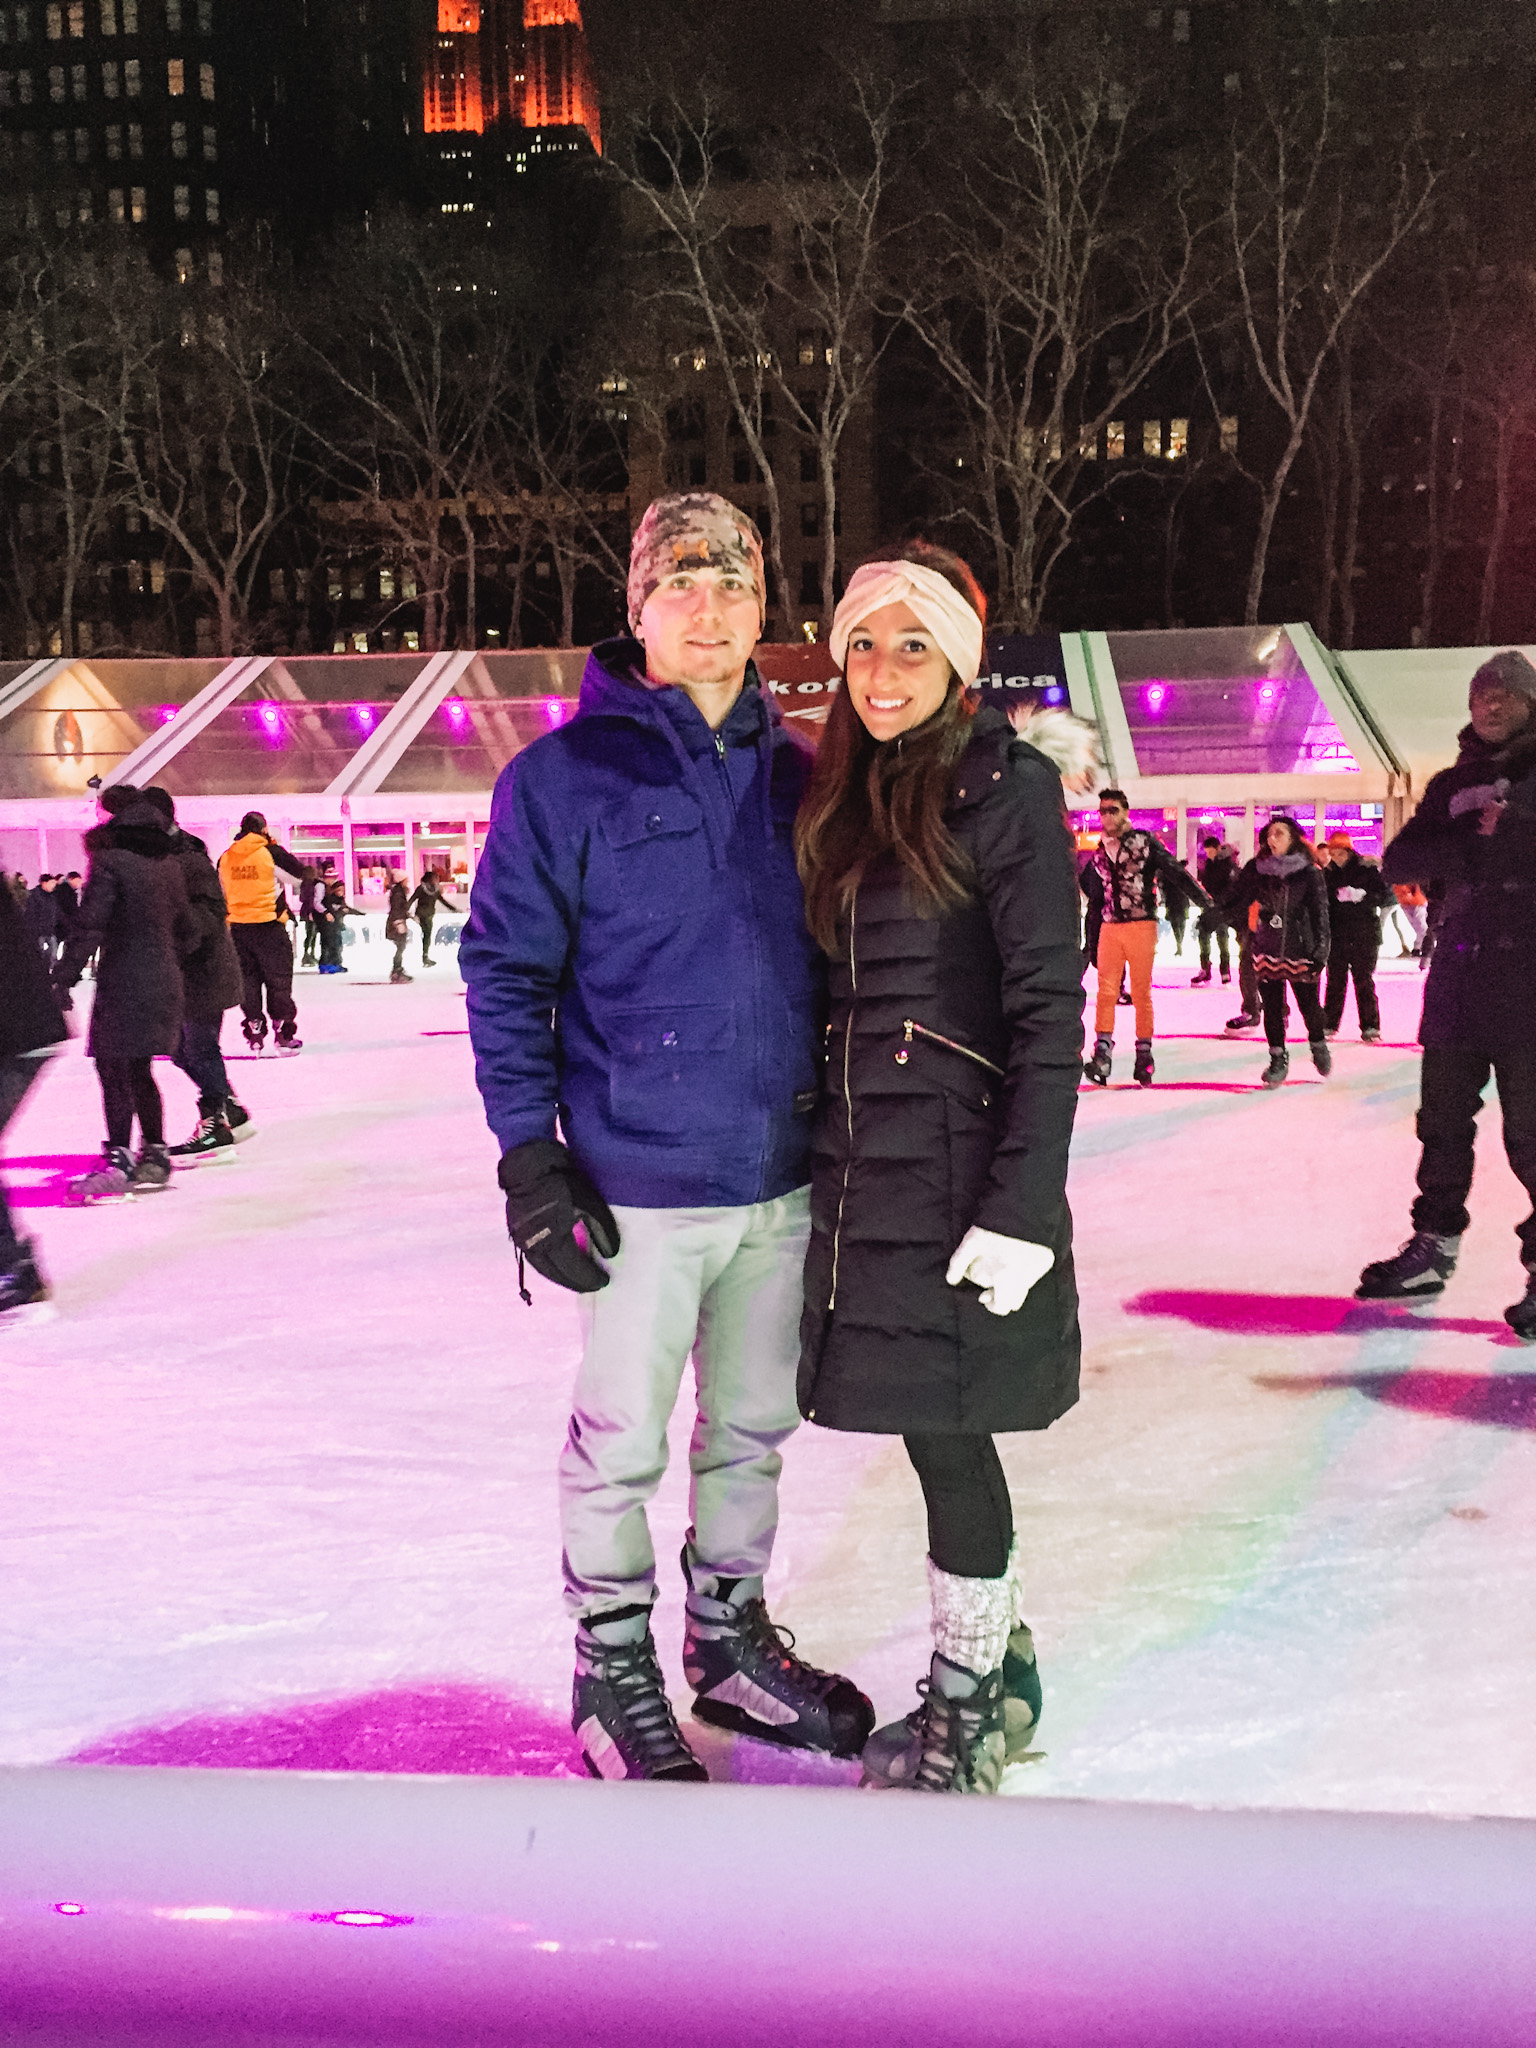 ICE SKATING IN BRYANT PARK | How to Celebrate 30th Birthday in NYC